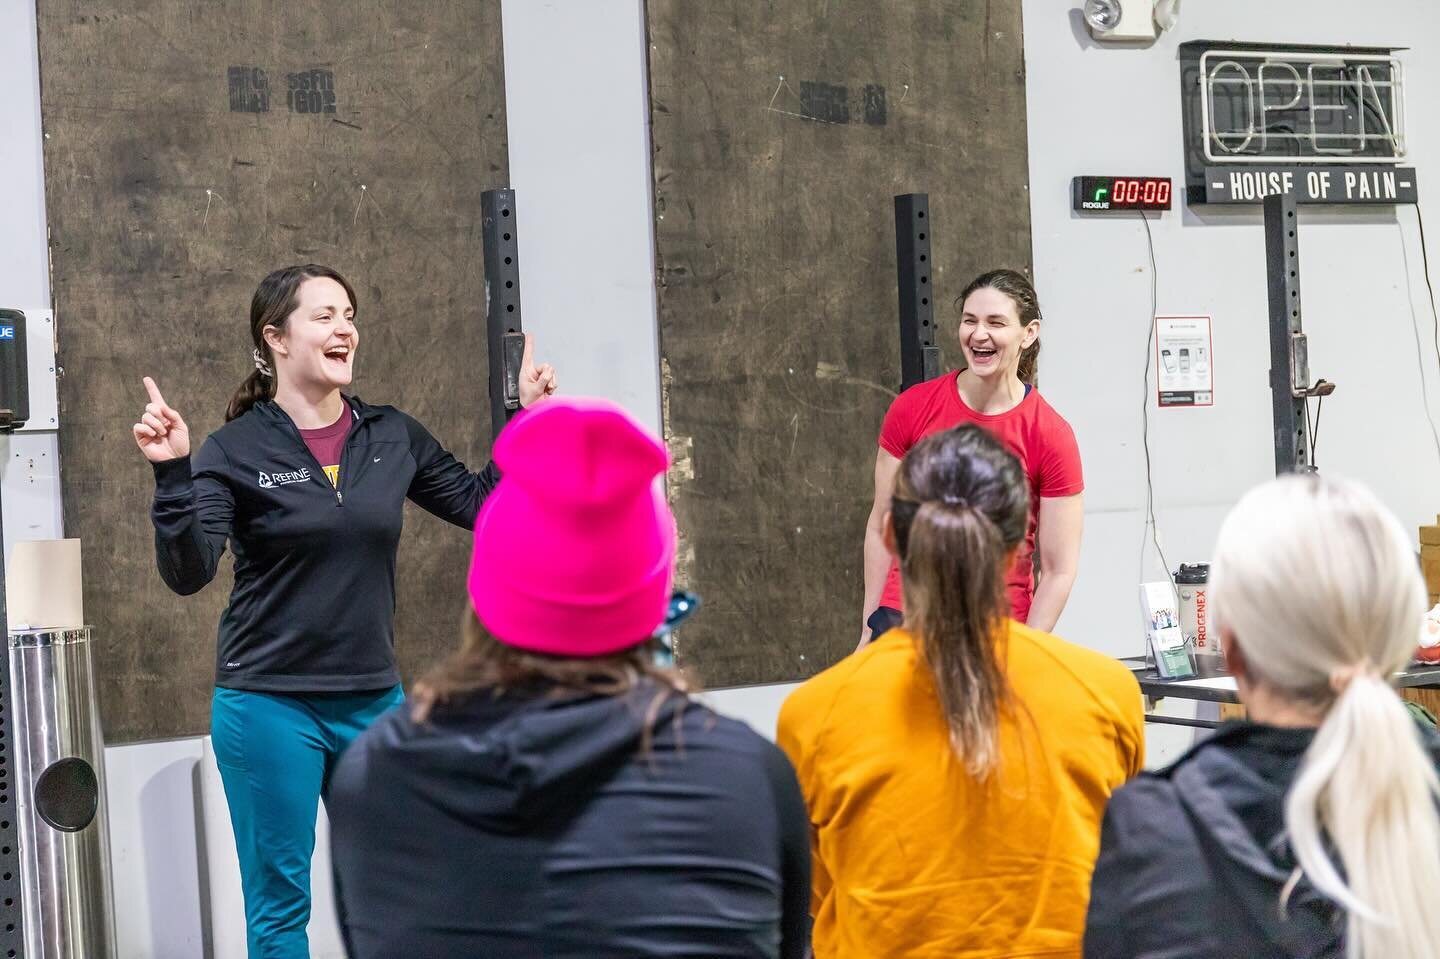 Our Seminar was a Hit!!! We covered the basics of the pelvic floor,  Some common dysfunctions, and techniques on how to jump with confidence.  Cant wait to do another one!  Are you in? @women.can.jump @amycurrytraining @crossfitbangor @krystalbrouty 